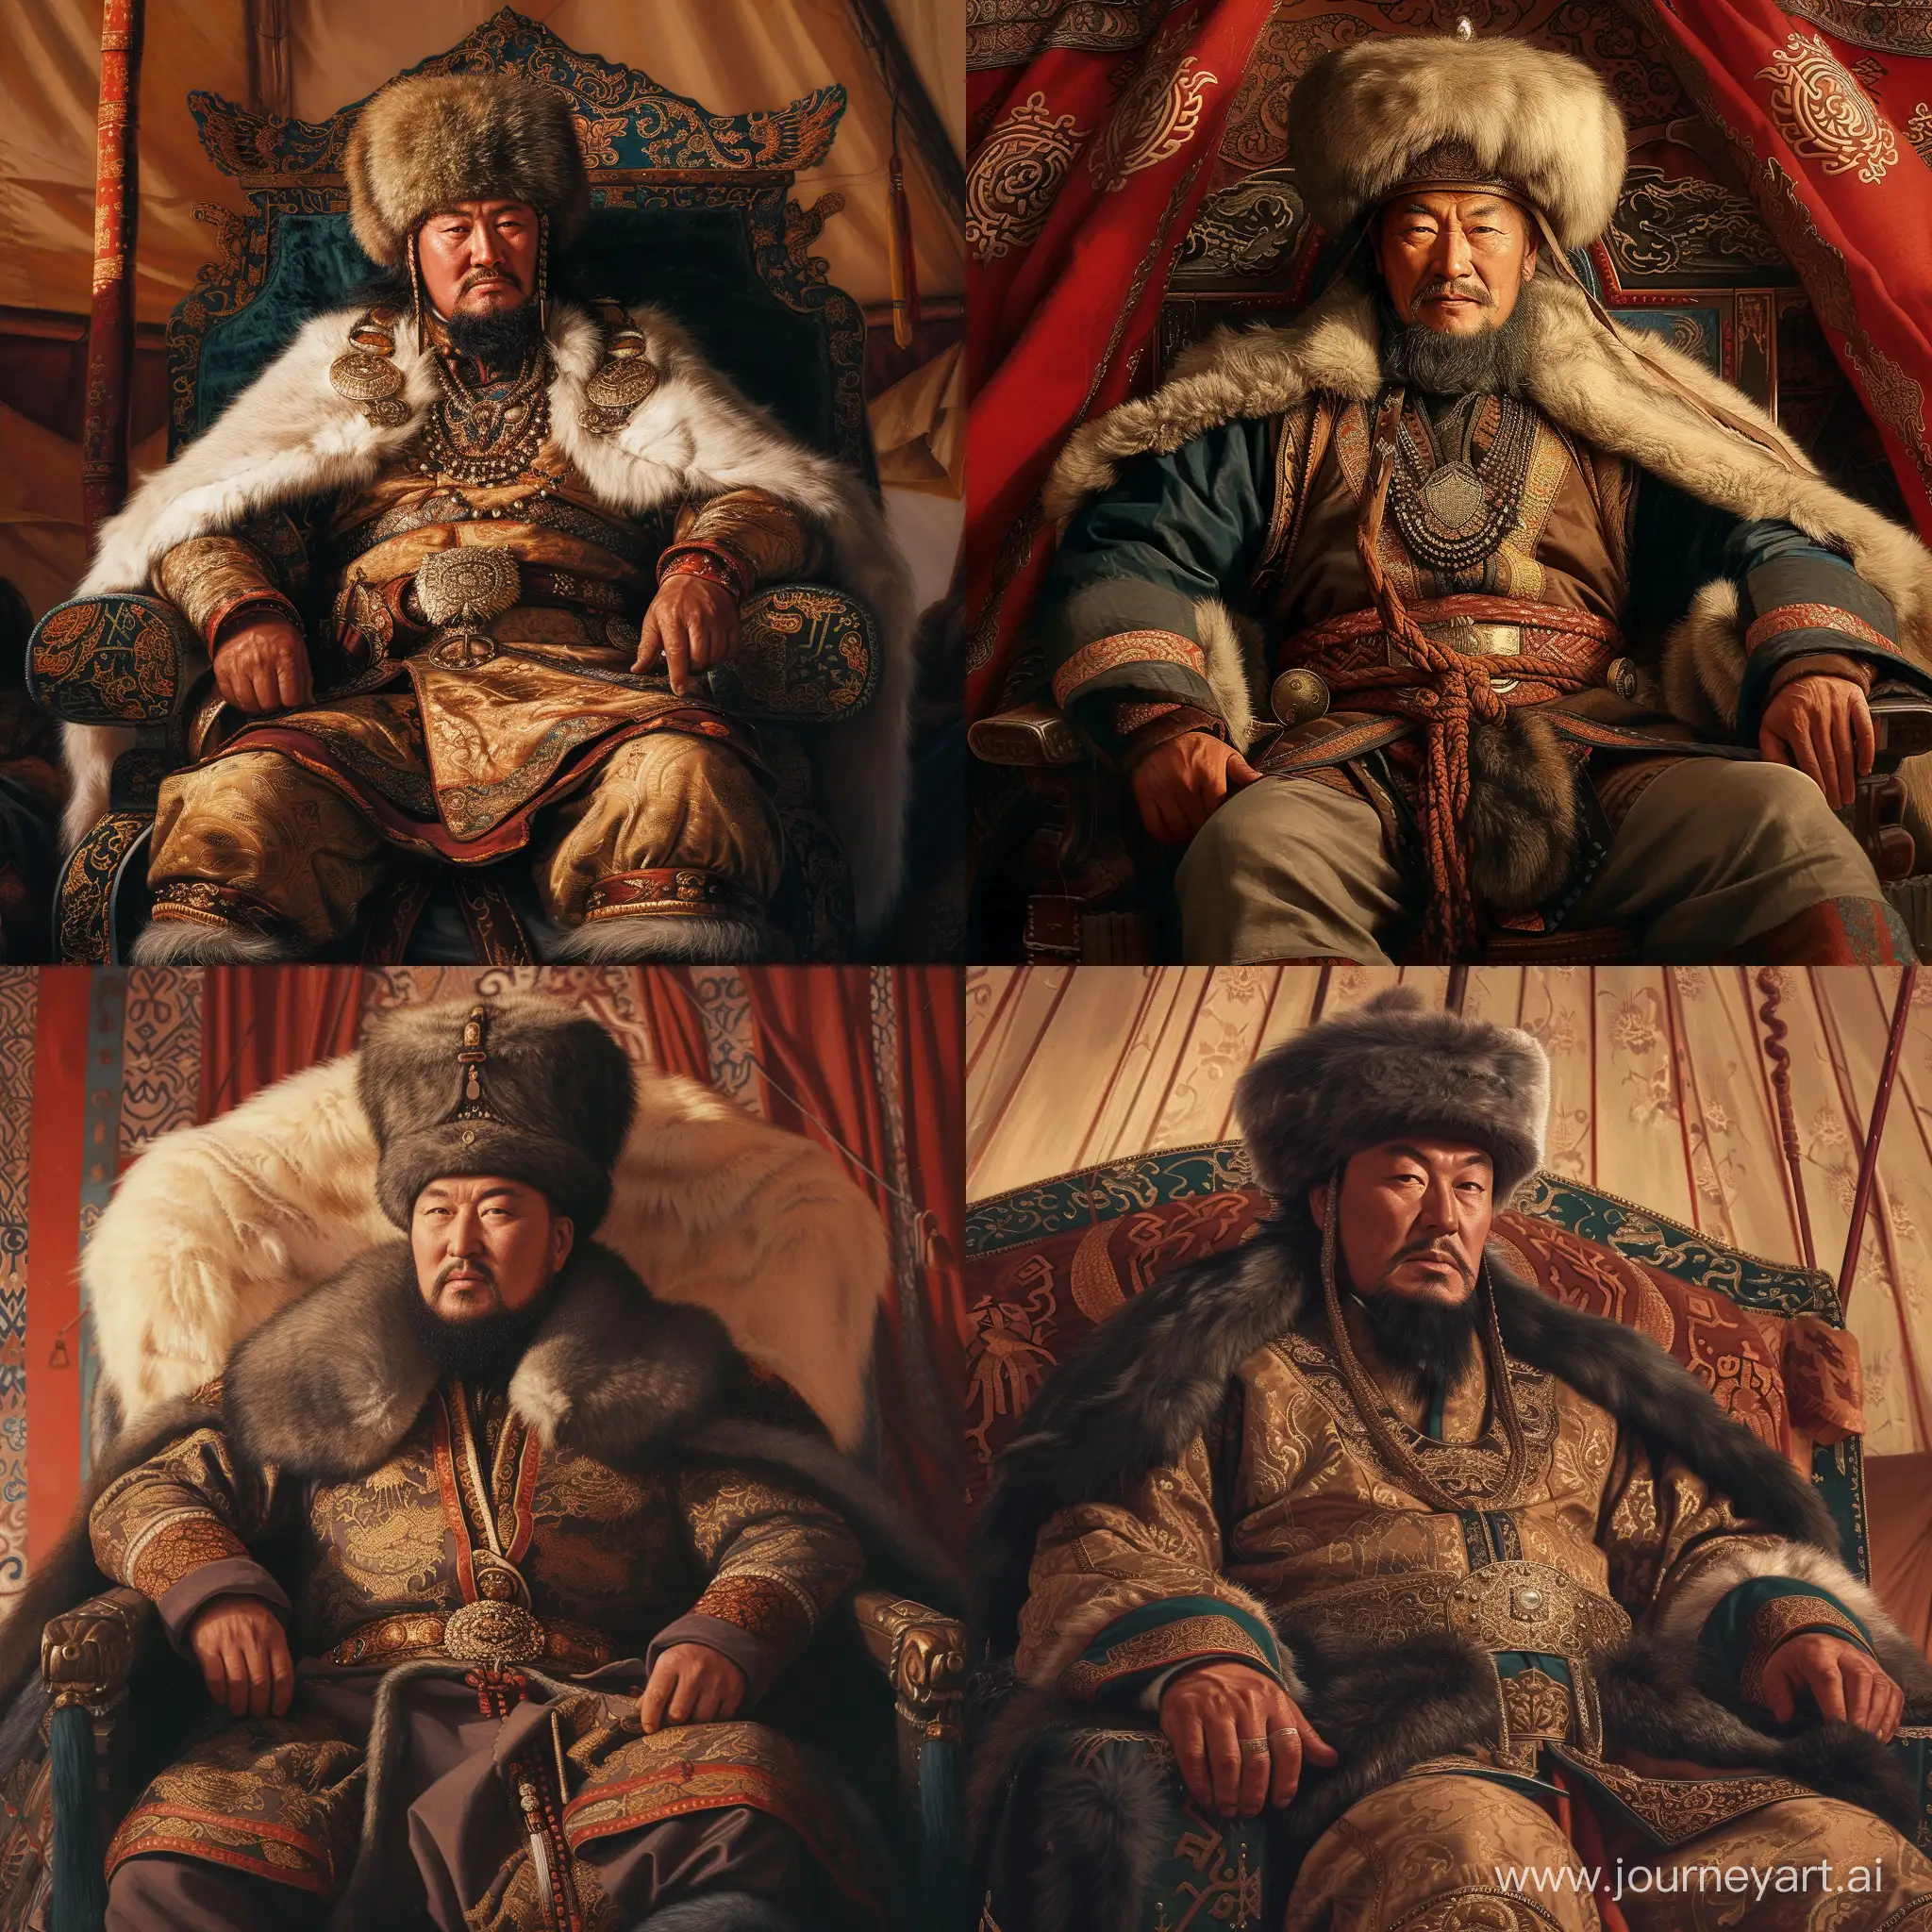 Portrait of Great Mongol Khan Ögedei sitting on his throne in Mongolian tent. He is wearing traditional Khan attire and fur hat. He has Mongolian hairstyle and beard.